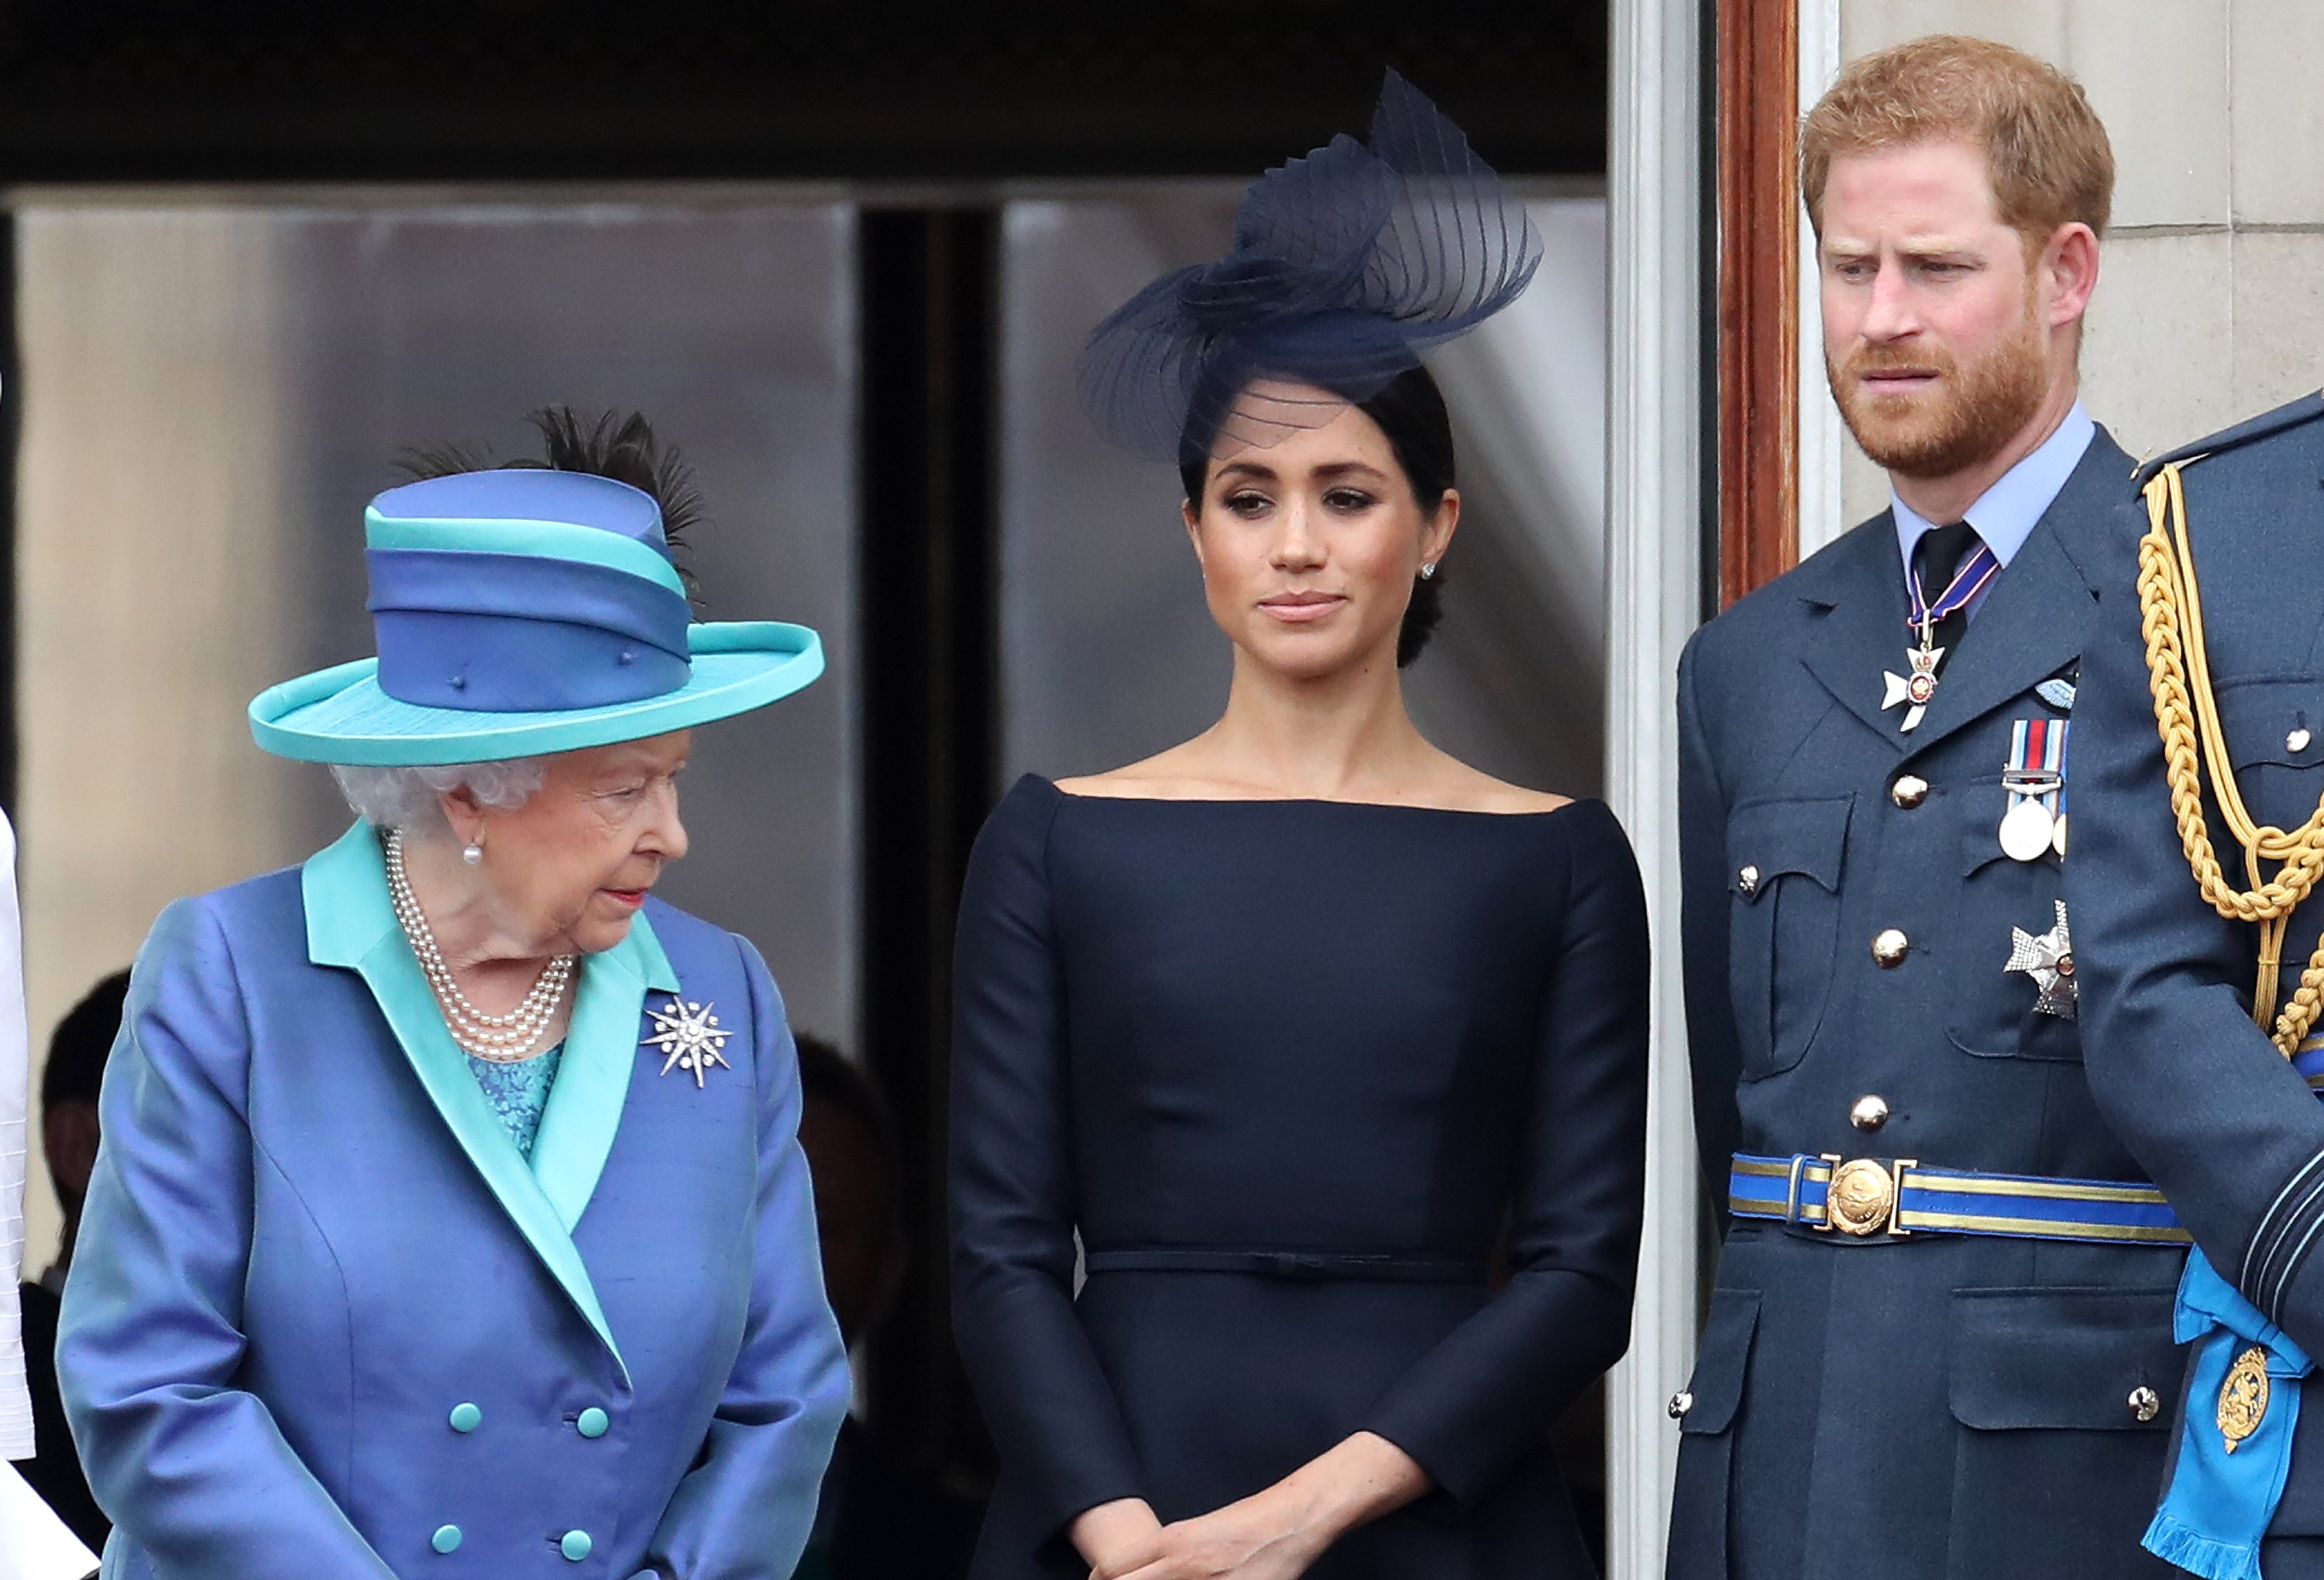 Queen Elizabeth II, Prince Harry, and Meghan Markle standing together on the balcony of Buckingham Palace